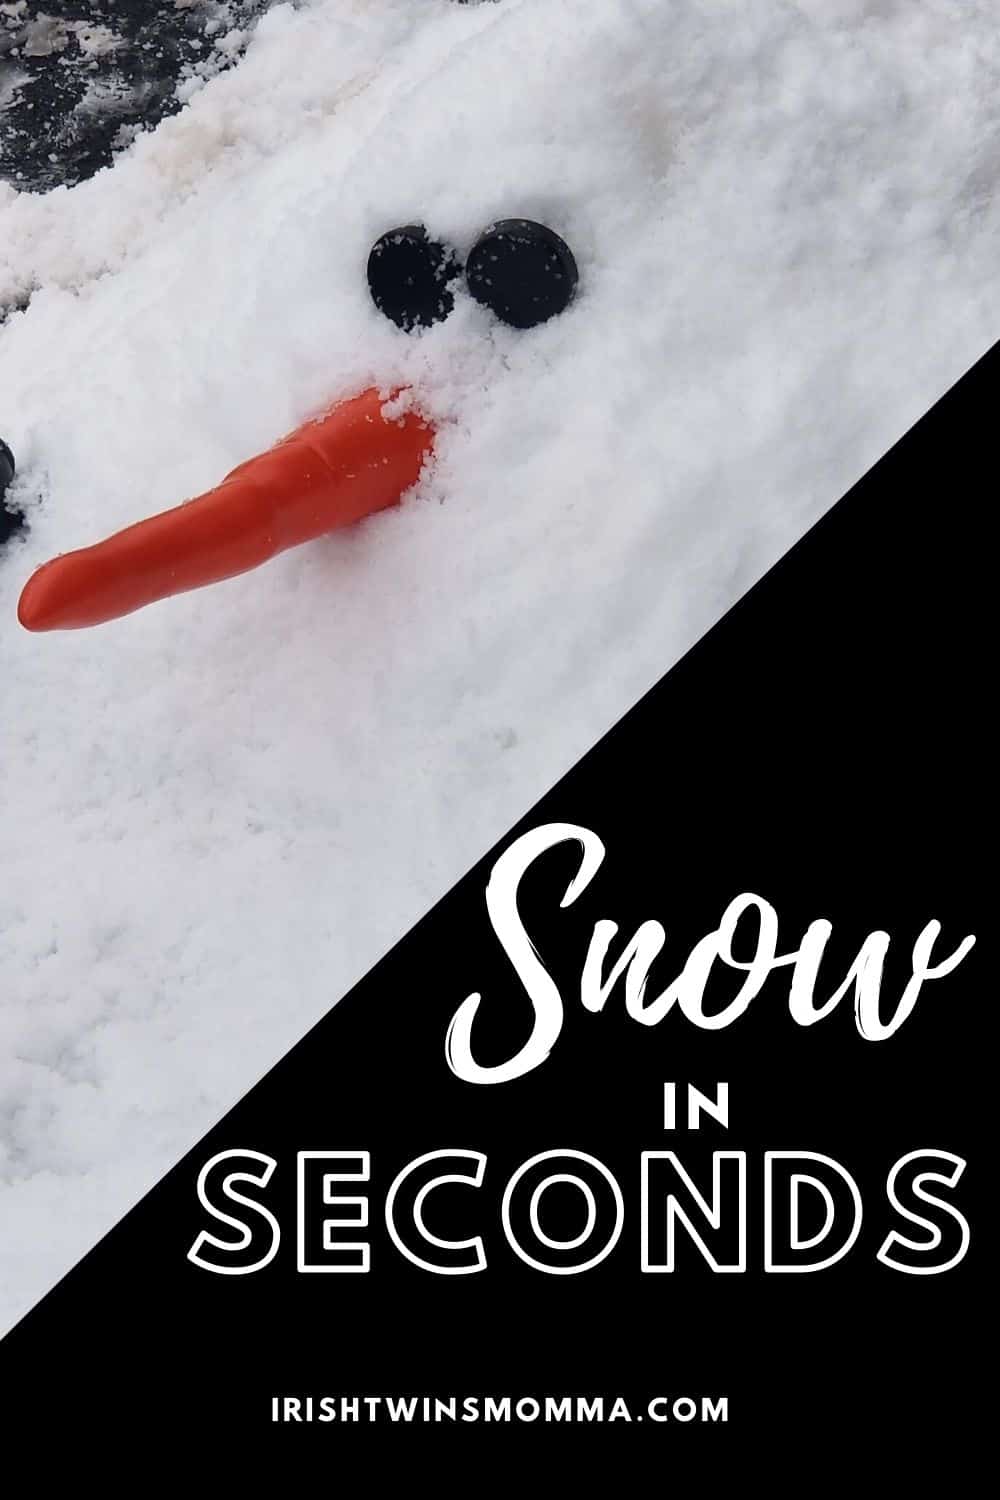 Snow in Seconds is a family-owned business that is the creator of the original fake snow. Their product is made in the U.S. and is the only instant snow that grows 100 times its size in just seconds. via @irishtwinsmom11